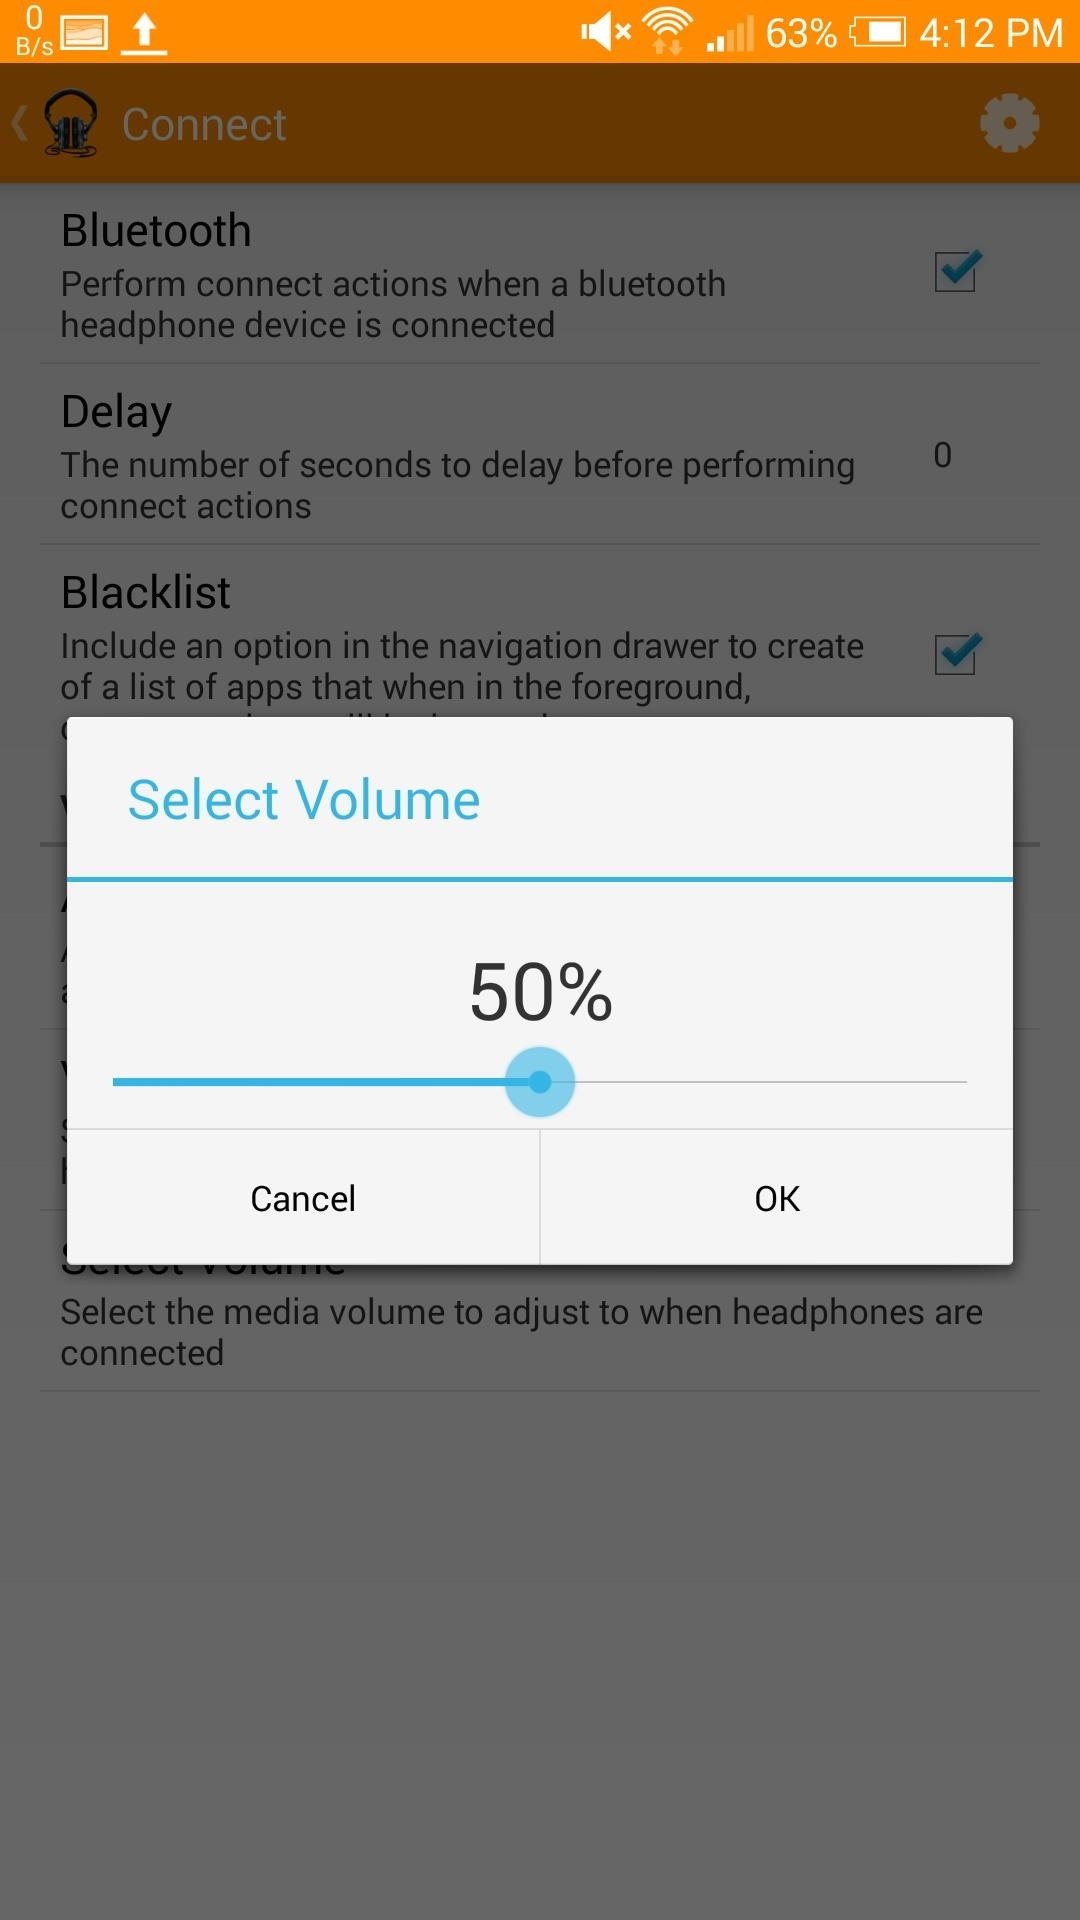 How to Use Headphones to Automatically Launch Apps on Your HTC One